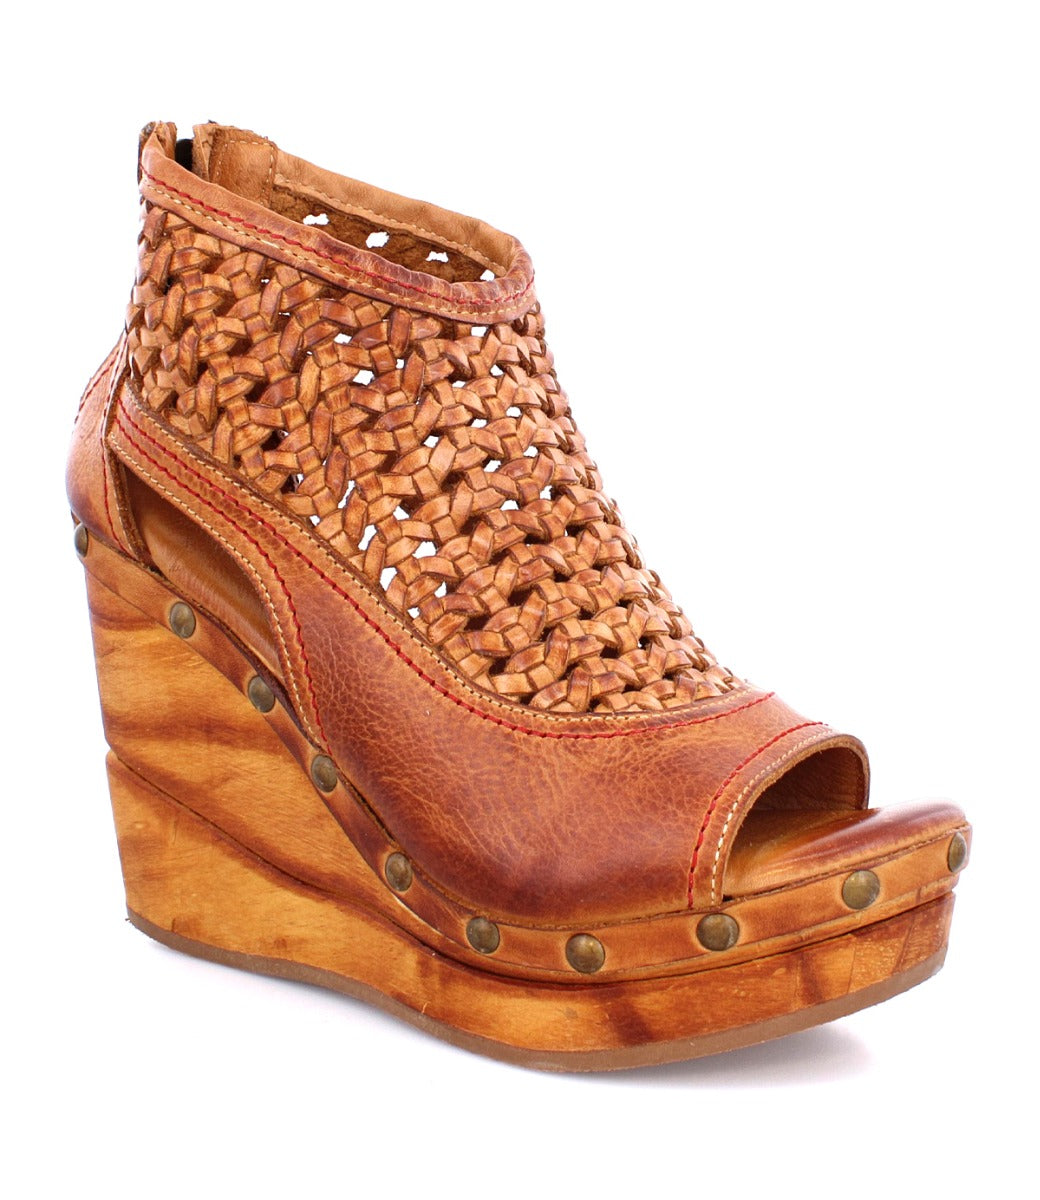 An Odette women's wedge sandal with a wooden platform by Bed Stu.